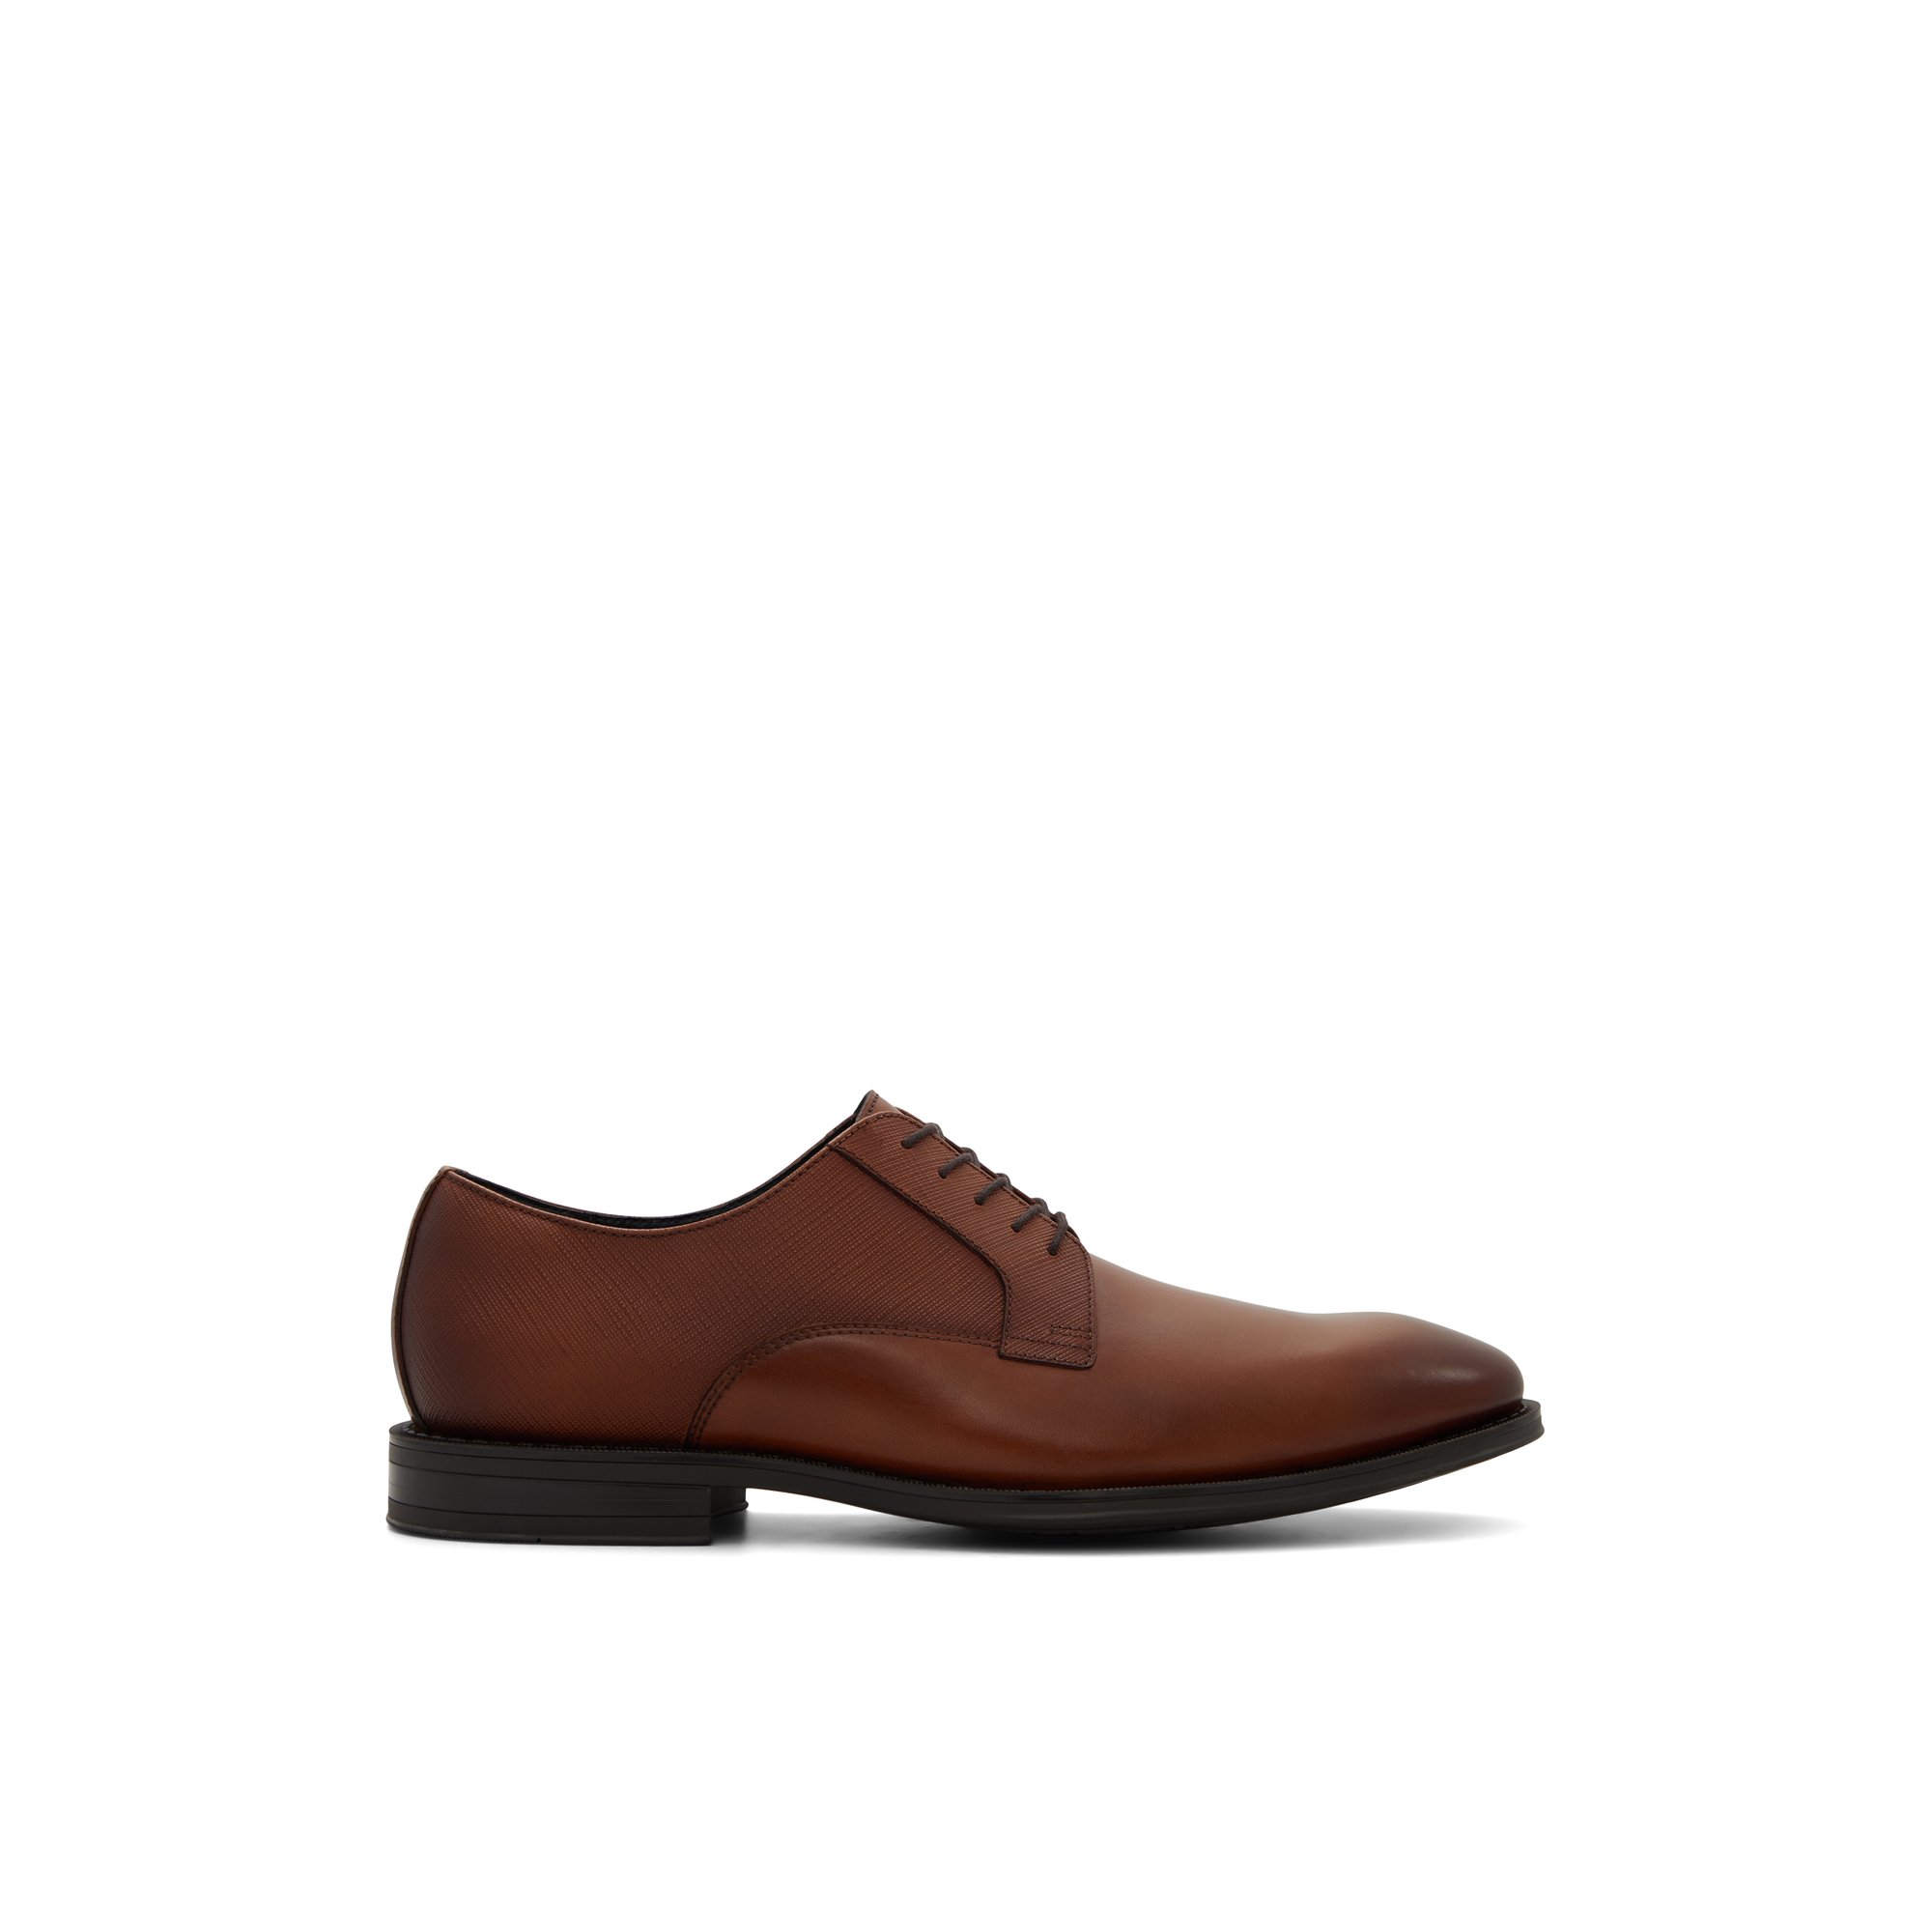 ALDO Heathcliff - Men's Oxfords and Lace up - Brown